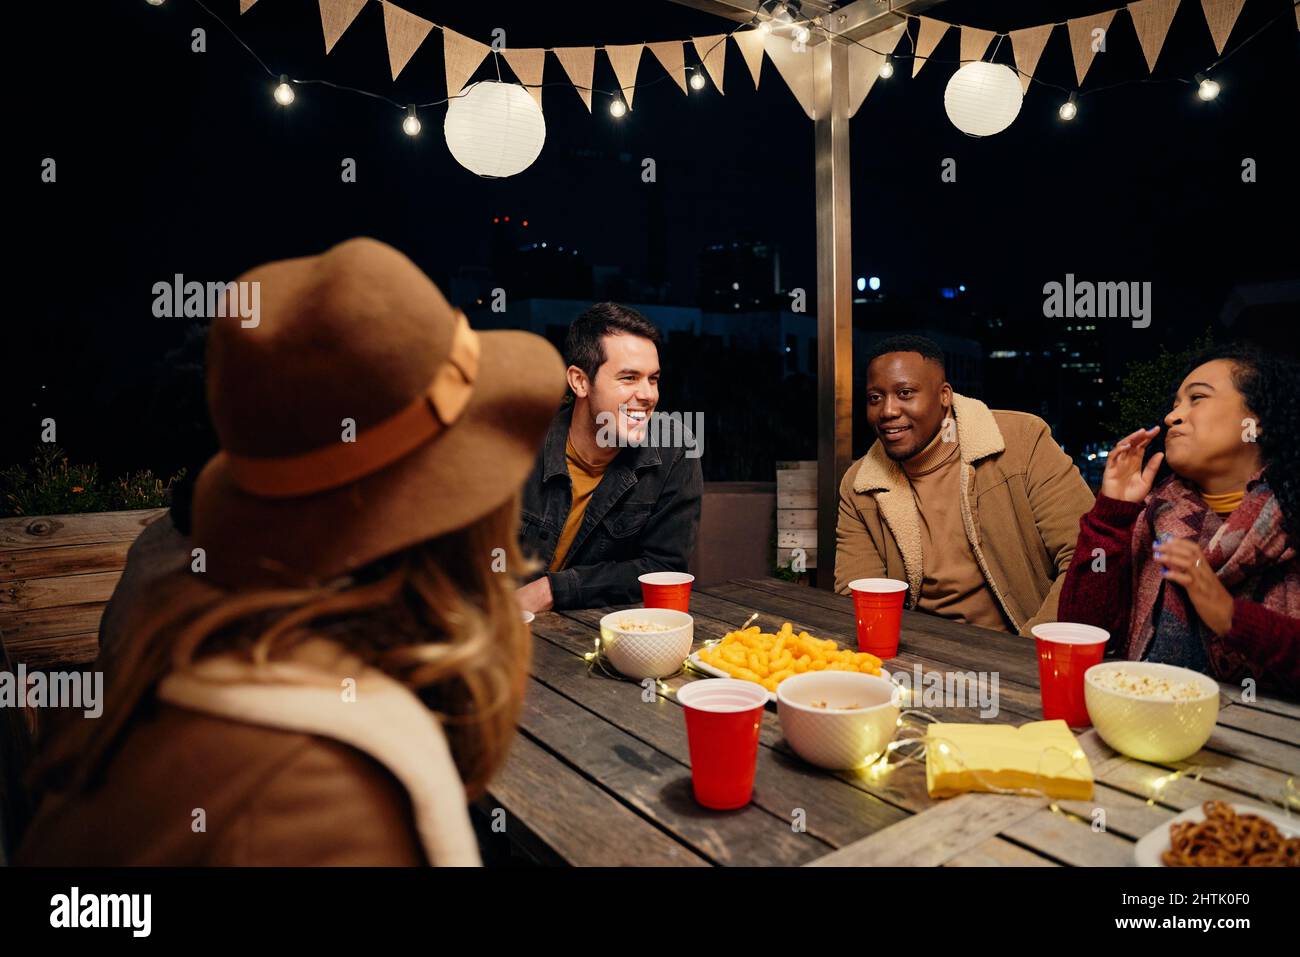 Multi-cultural group of young adult friends laughing while around a table at a trendy rooftop party. Eating and drinking, having a good time Stock Photo